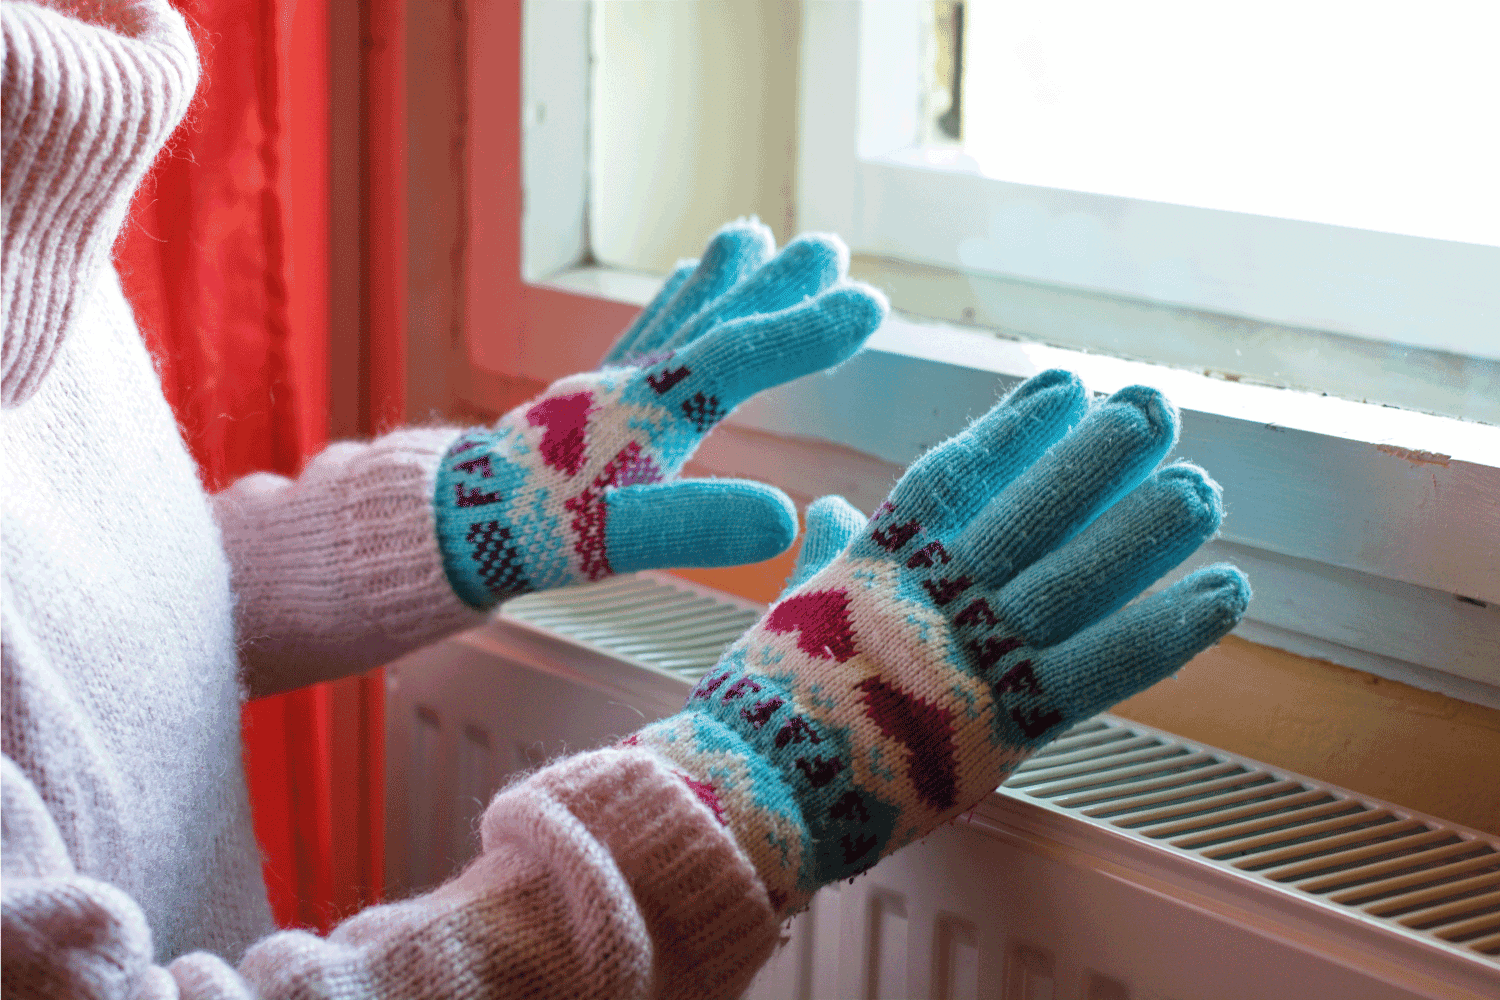 A woman hands in wool gloves warms near the heater